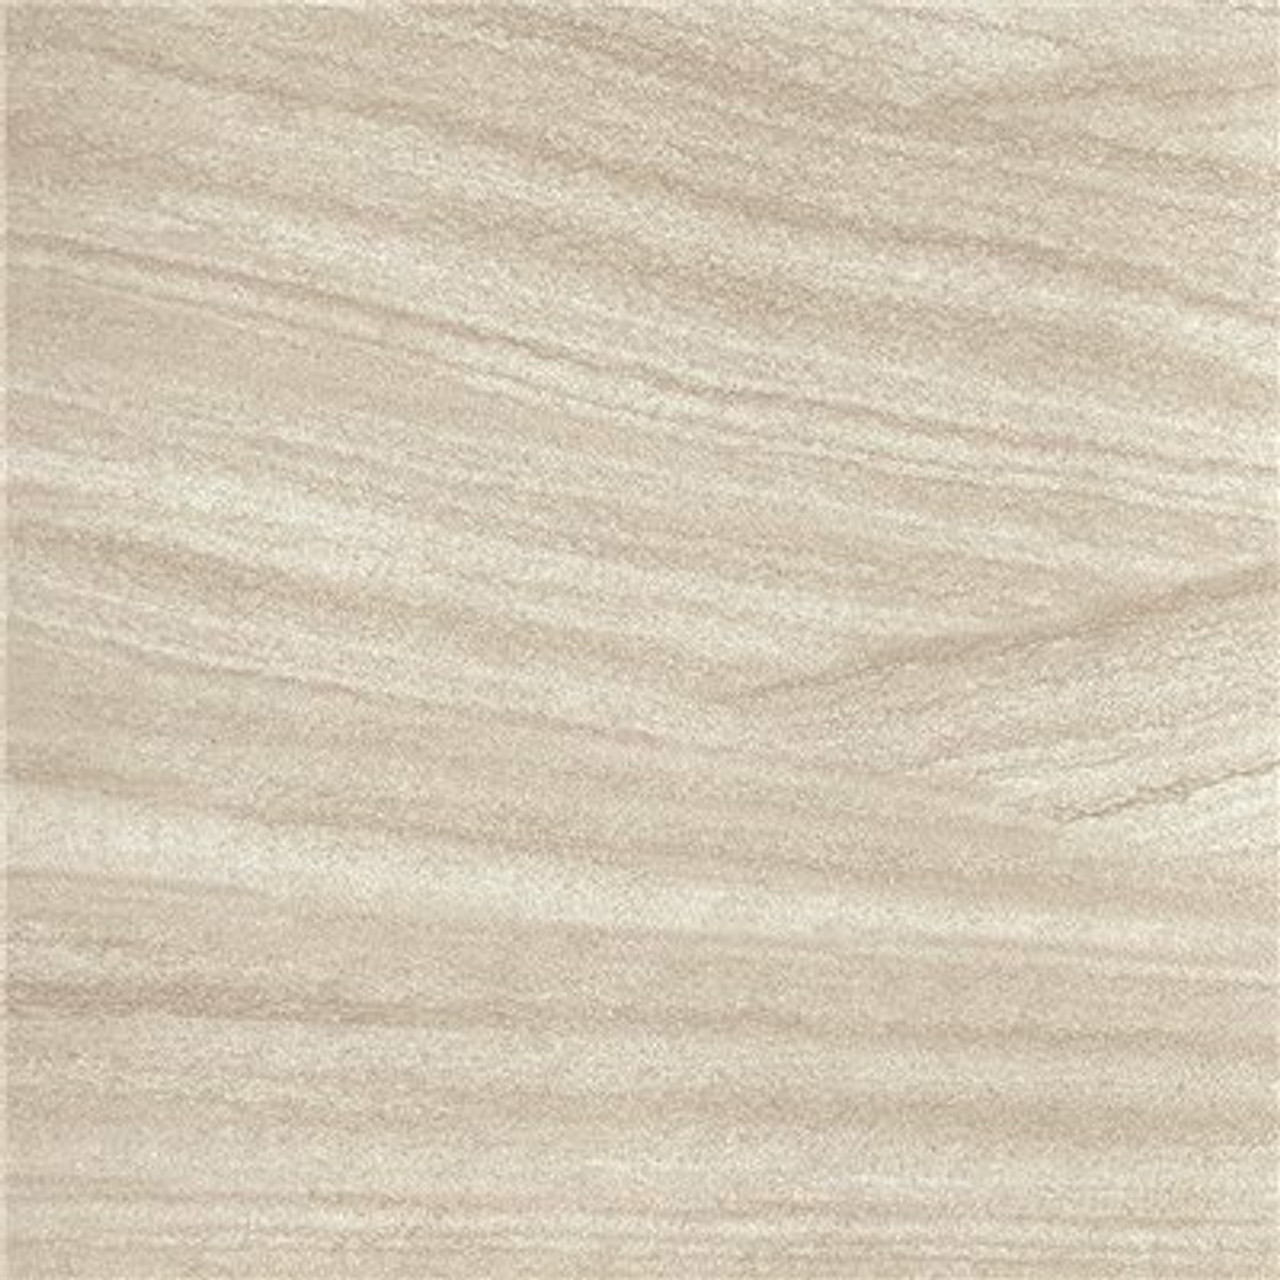 Trafficmaster Linear Limestone 12 In. X 12 In. Peel And Stick Vinyl Tile (30 Sq. Ft. / Case)